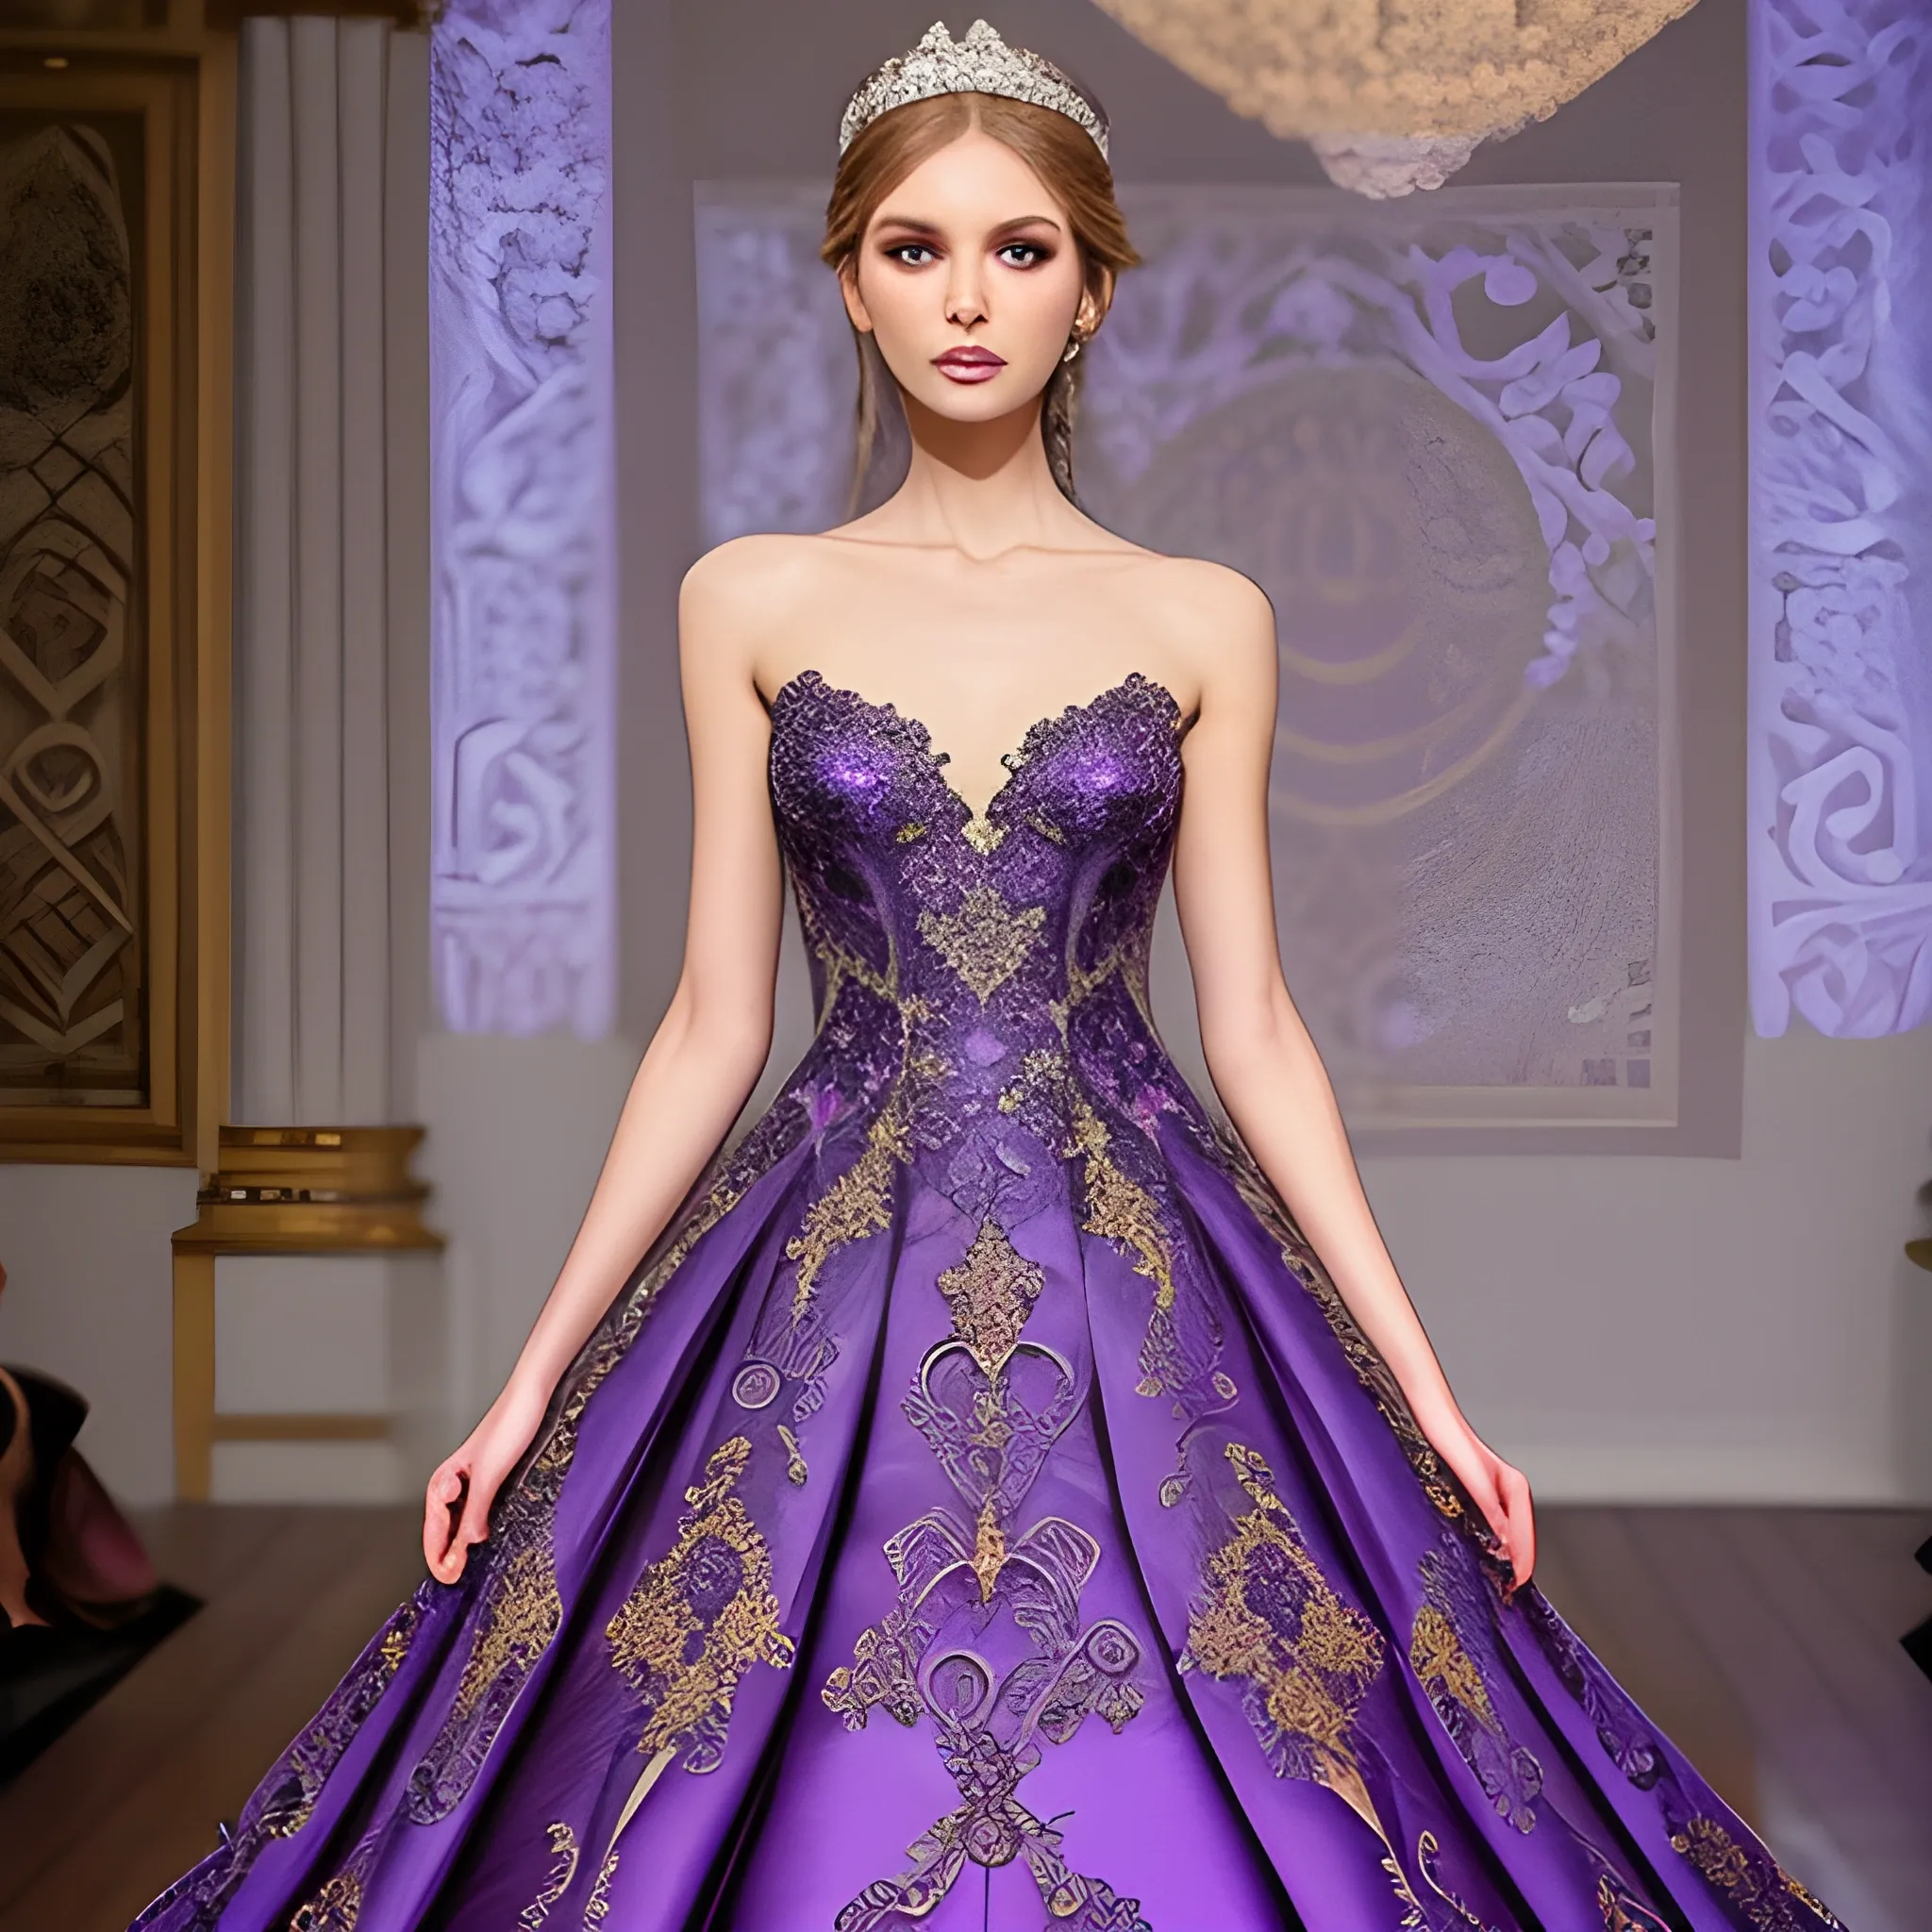 Intricate detail fantasy wedding gown purple and gold lace goddess dream dress puffy 